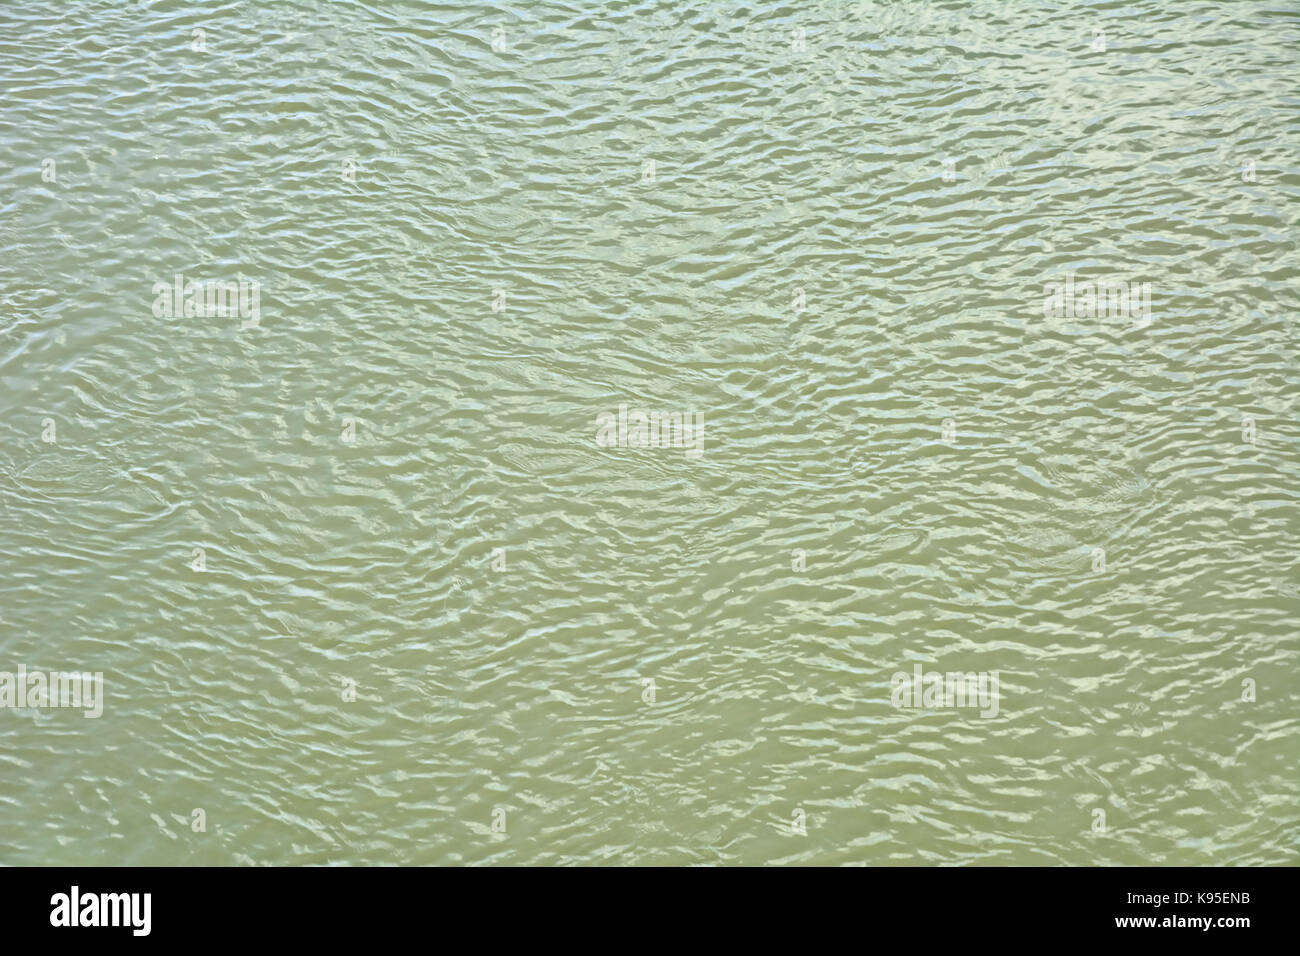 Small waves. Wrinkled by the wind surface water. Small short waves driven wind. Stock Photo